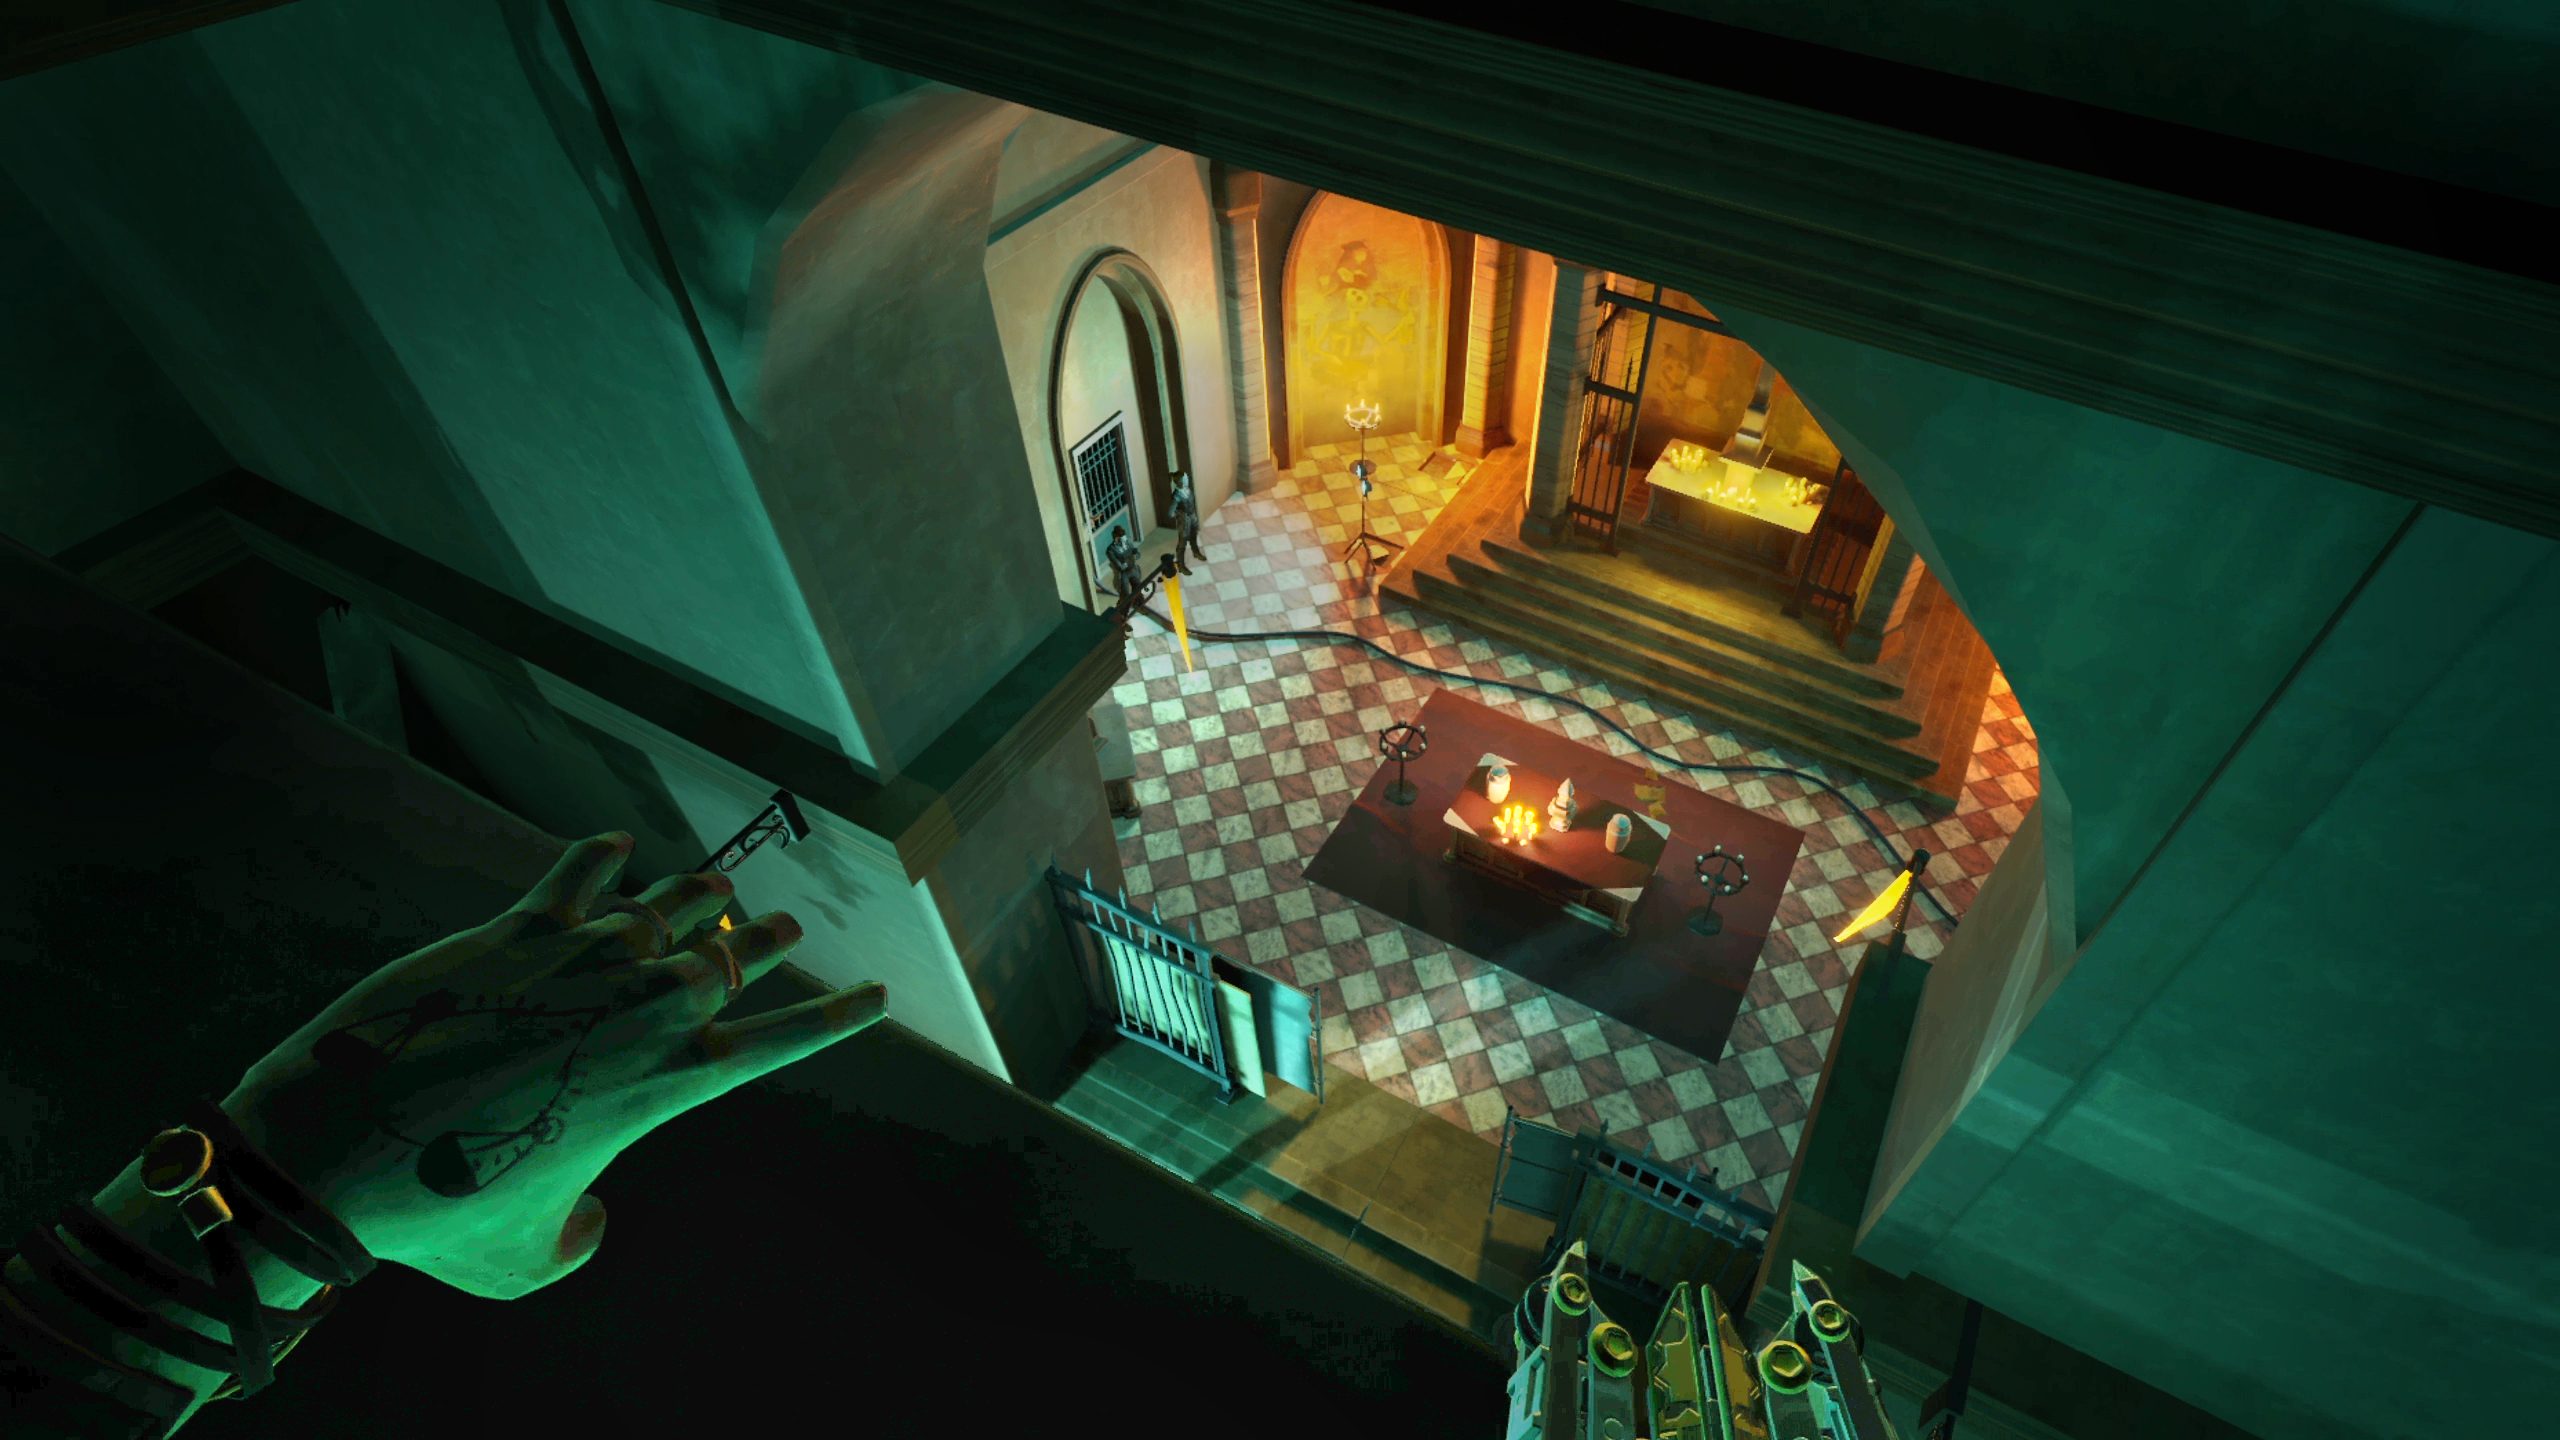 Vampire: The Masquerade - Justice could be a real VR hit